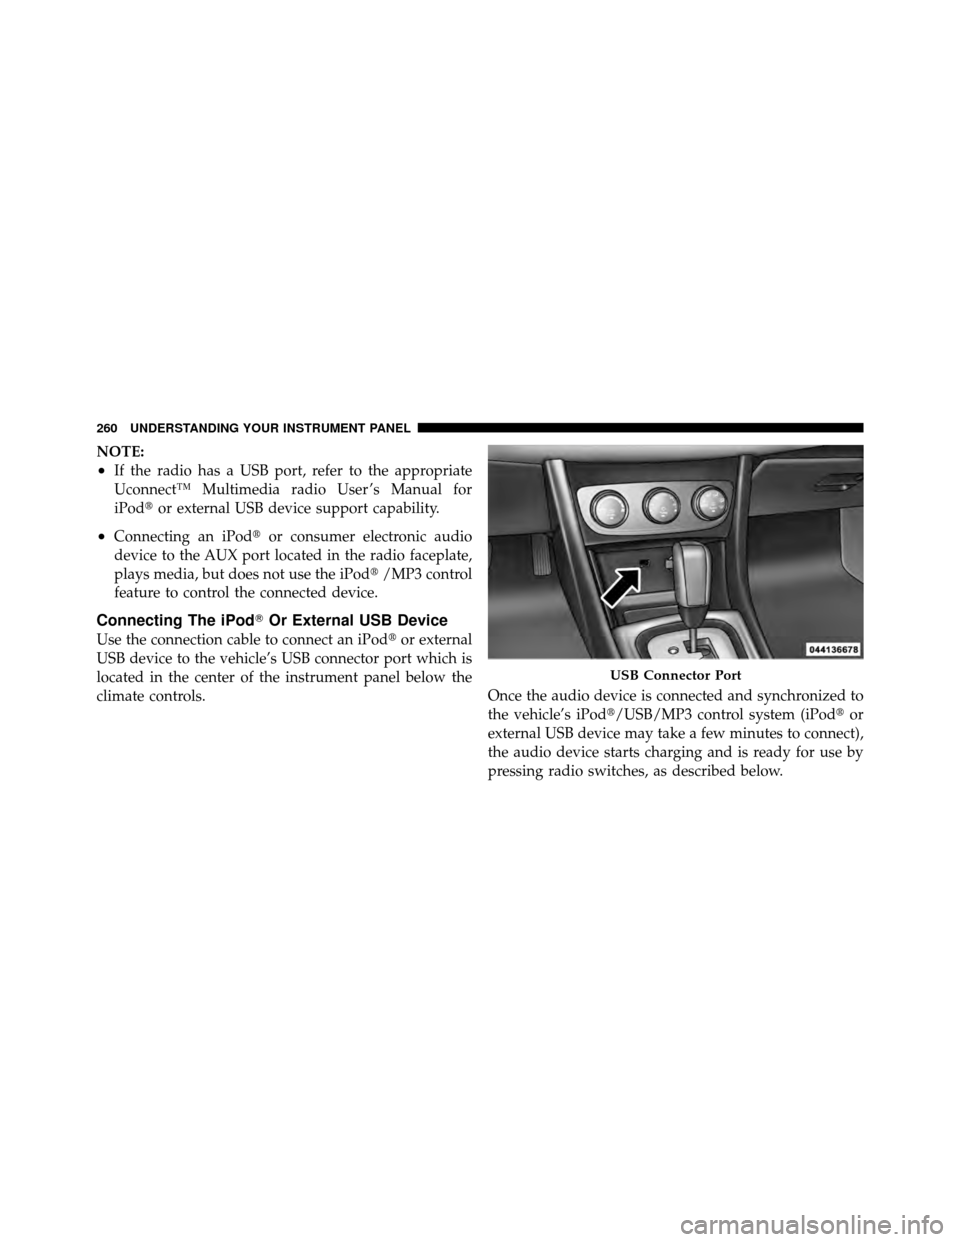 CHRYSLER 200 2011 1.G Owners Manual NOTE:
•If the radio has a USB port, refer to the appropriate
Uconnect™ Multimedia radio User ’s Manual for
iPodor external USB device support capability.
•Connecting an iPod or consumer elec